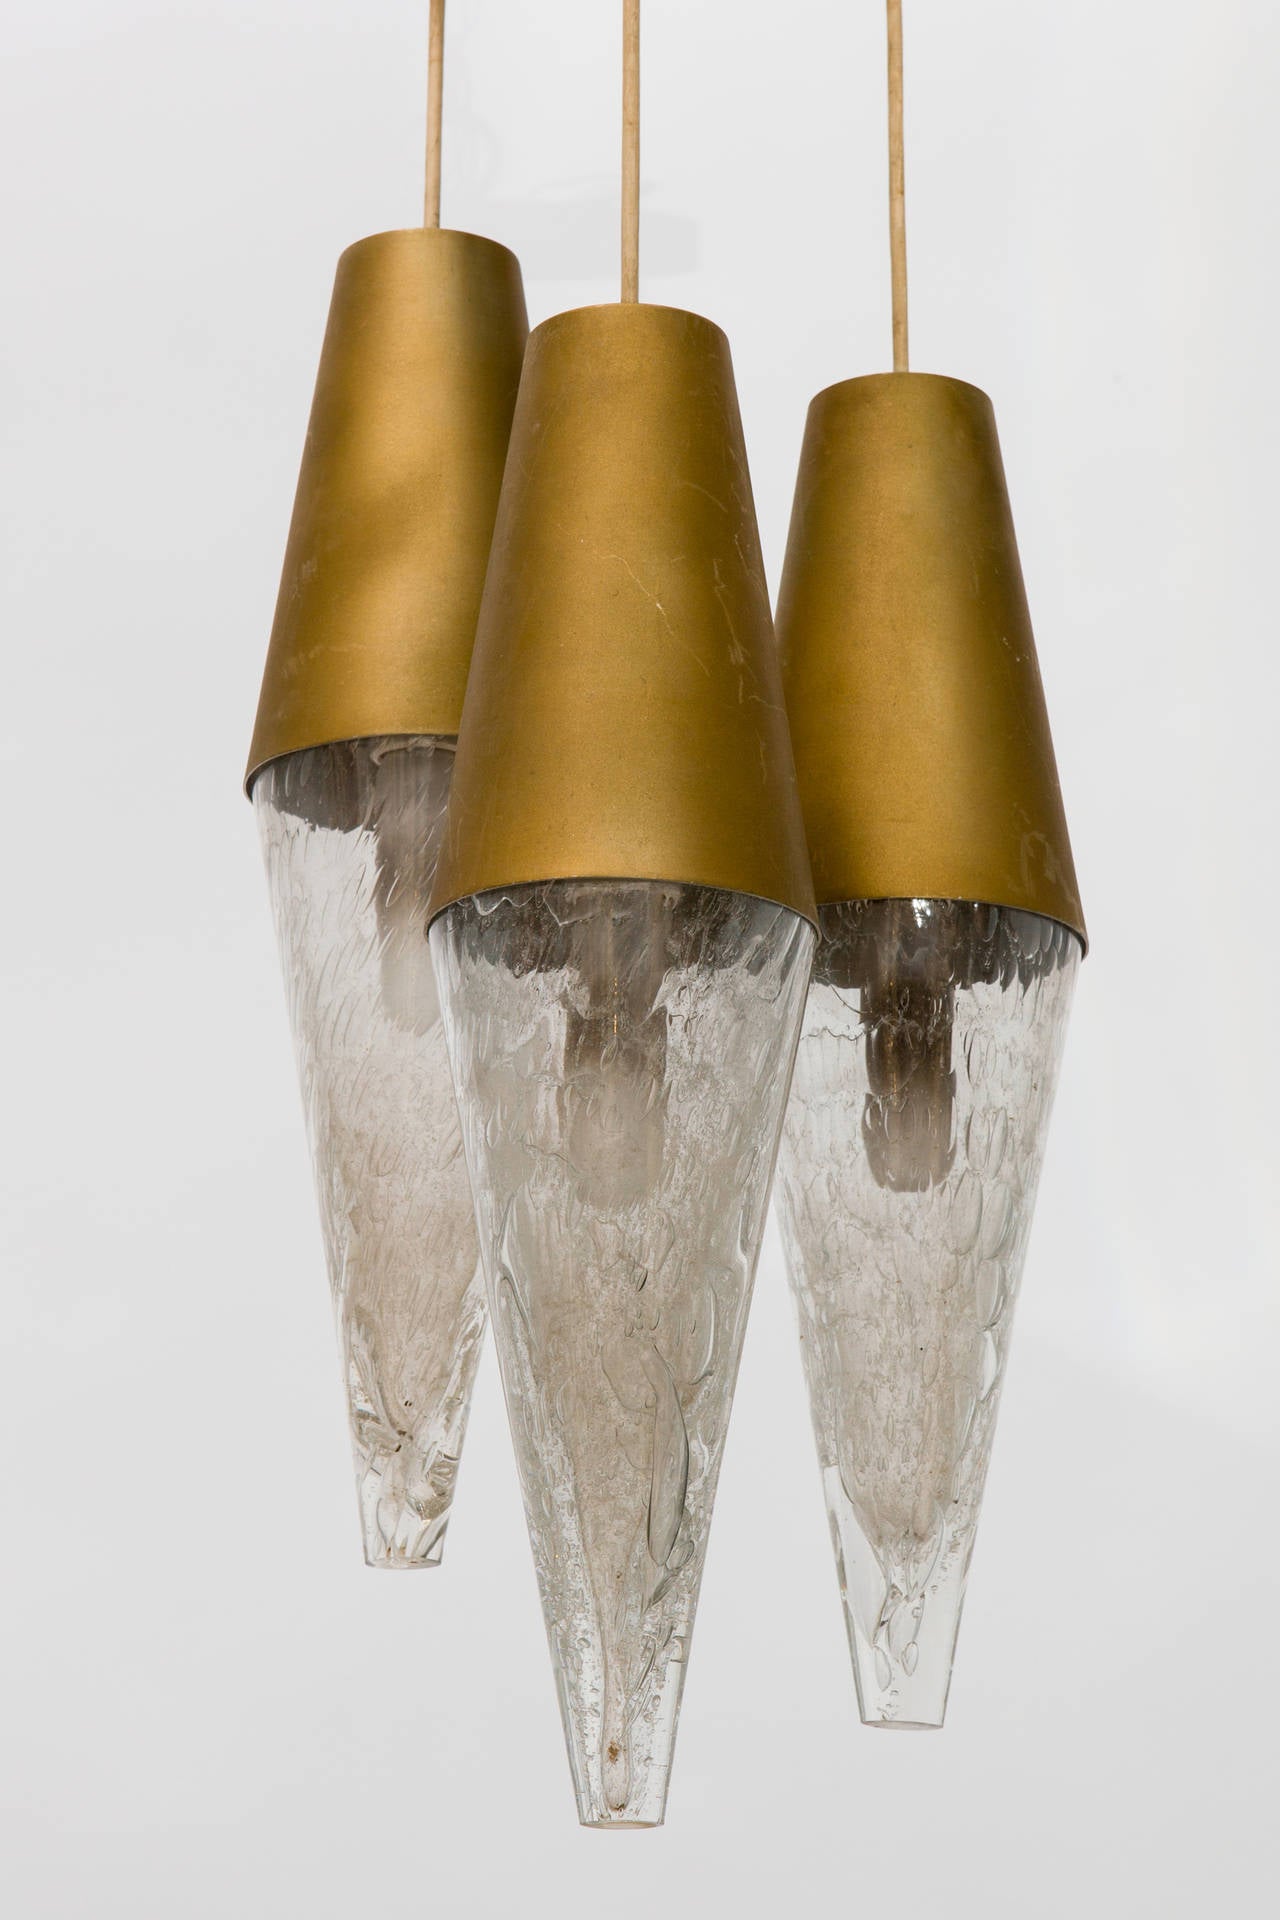 Three pendant staggered glass and metal cone, 1950s fixture.